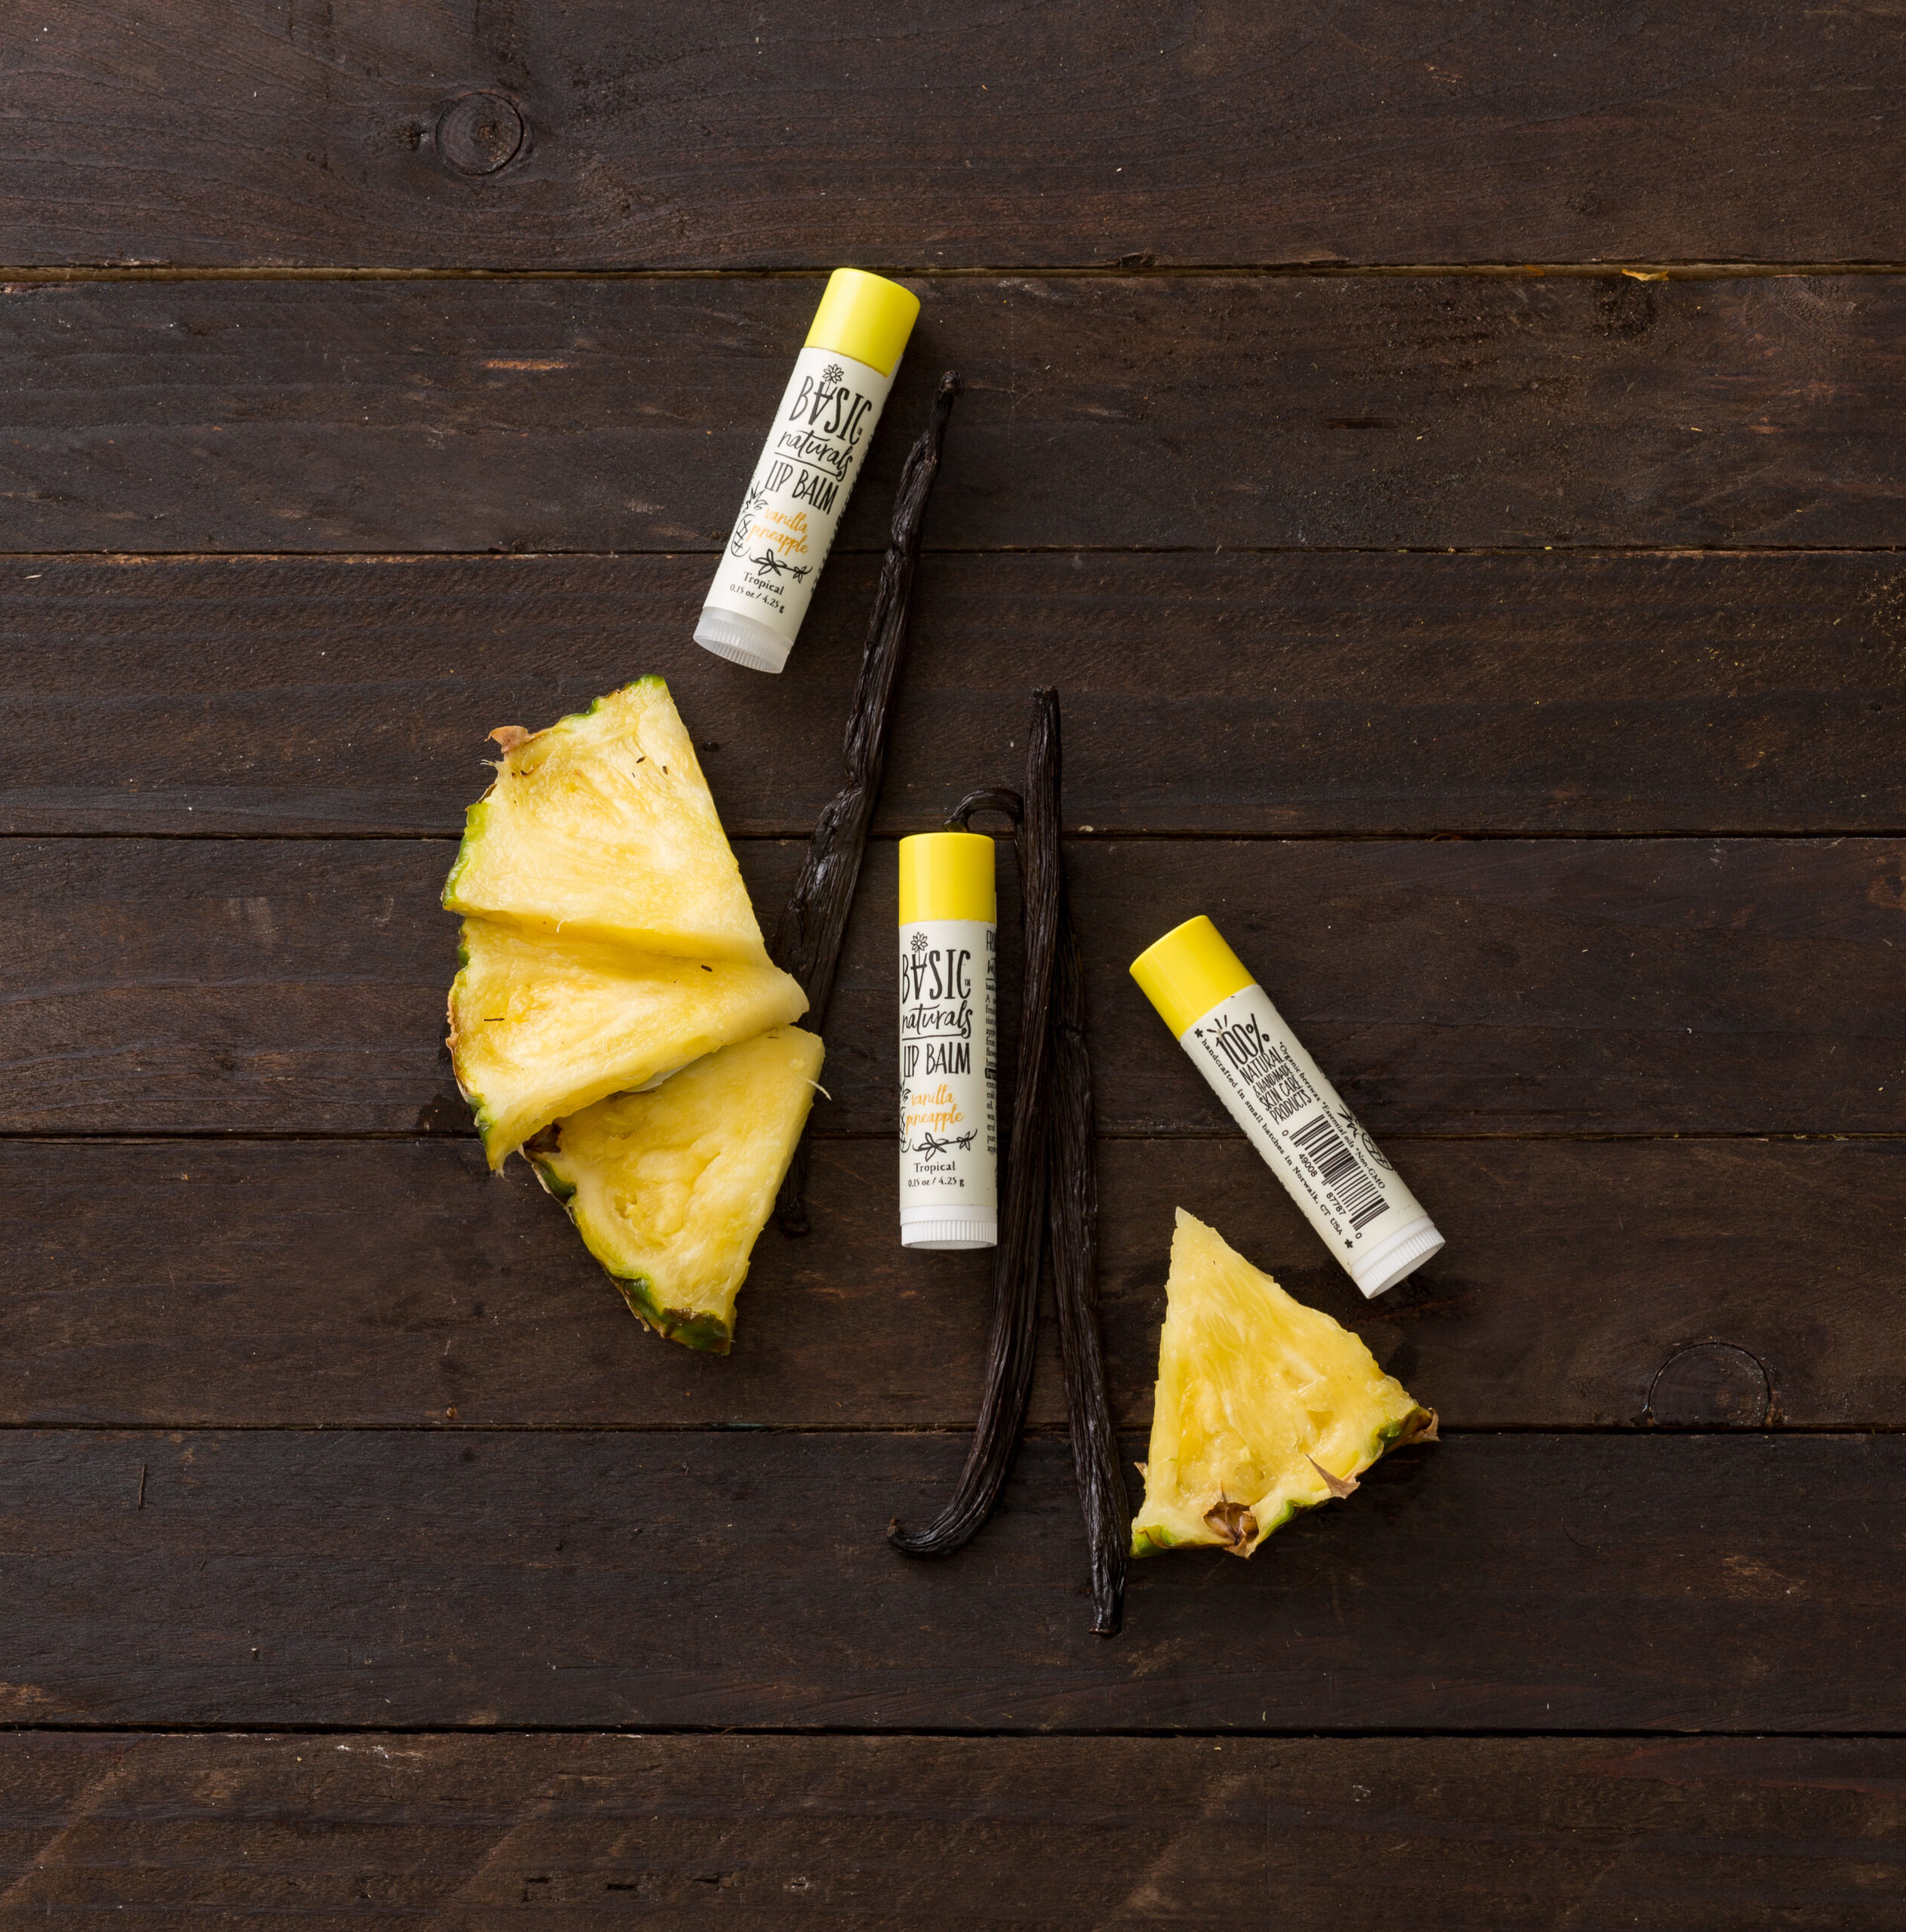 Ultimate Lip Treatment - Vanilla Pineapple Scented Lip Balm Artistic Photograph of 3 Products with Fruit Pieces on dark wood background